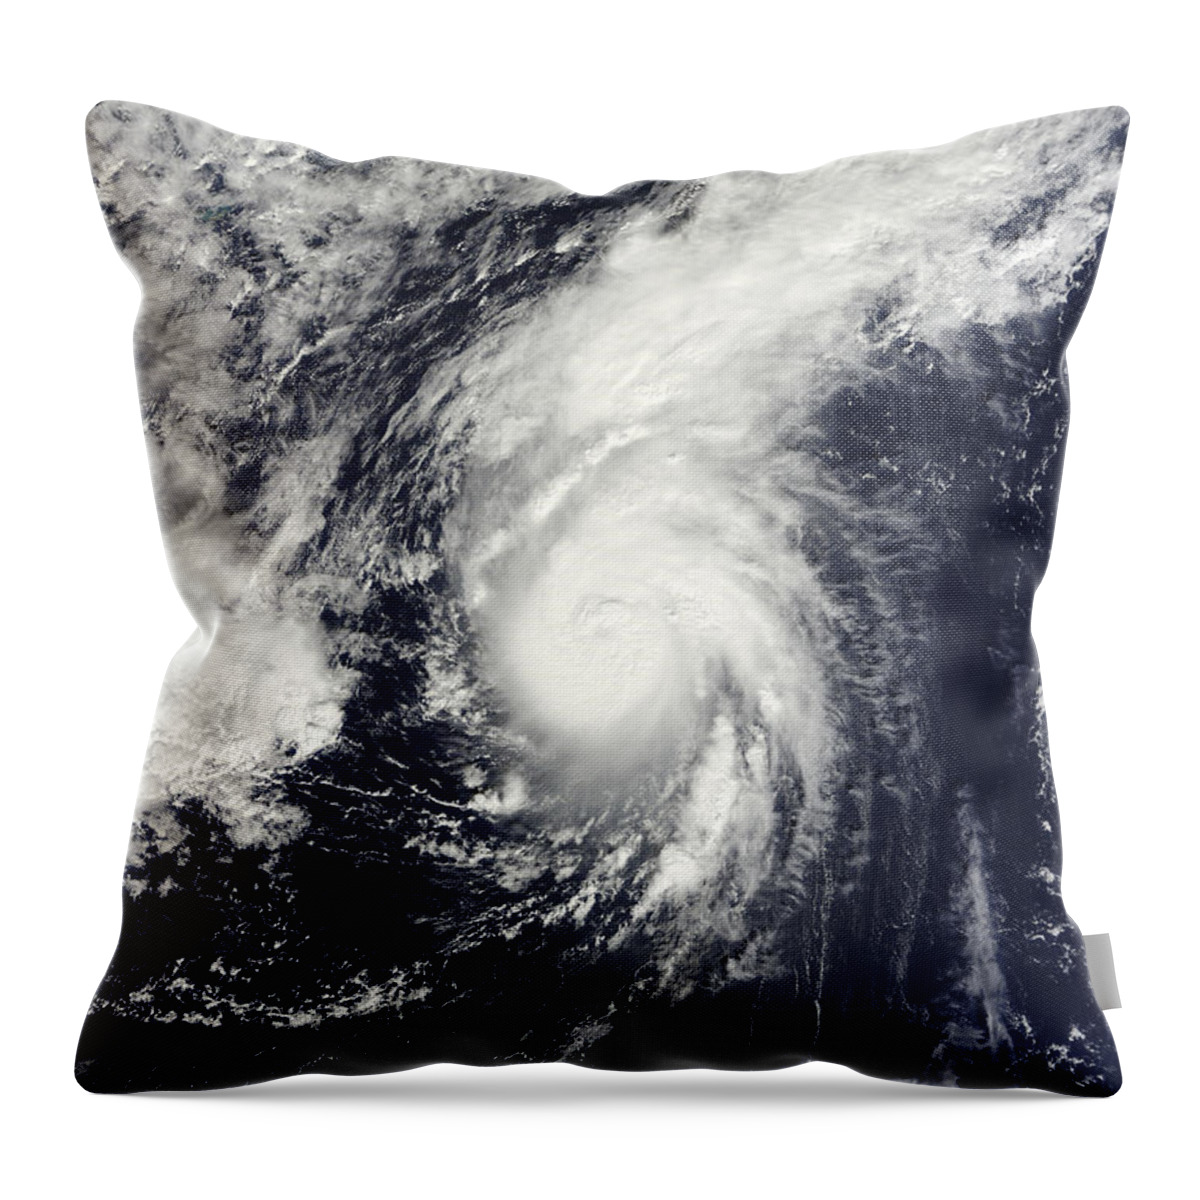 Pacific Ocean Throw Pillow featuring the photograph Hurricane Philippe by Stocktrek Images